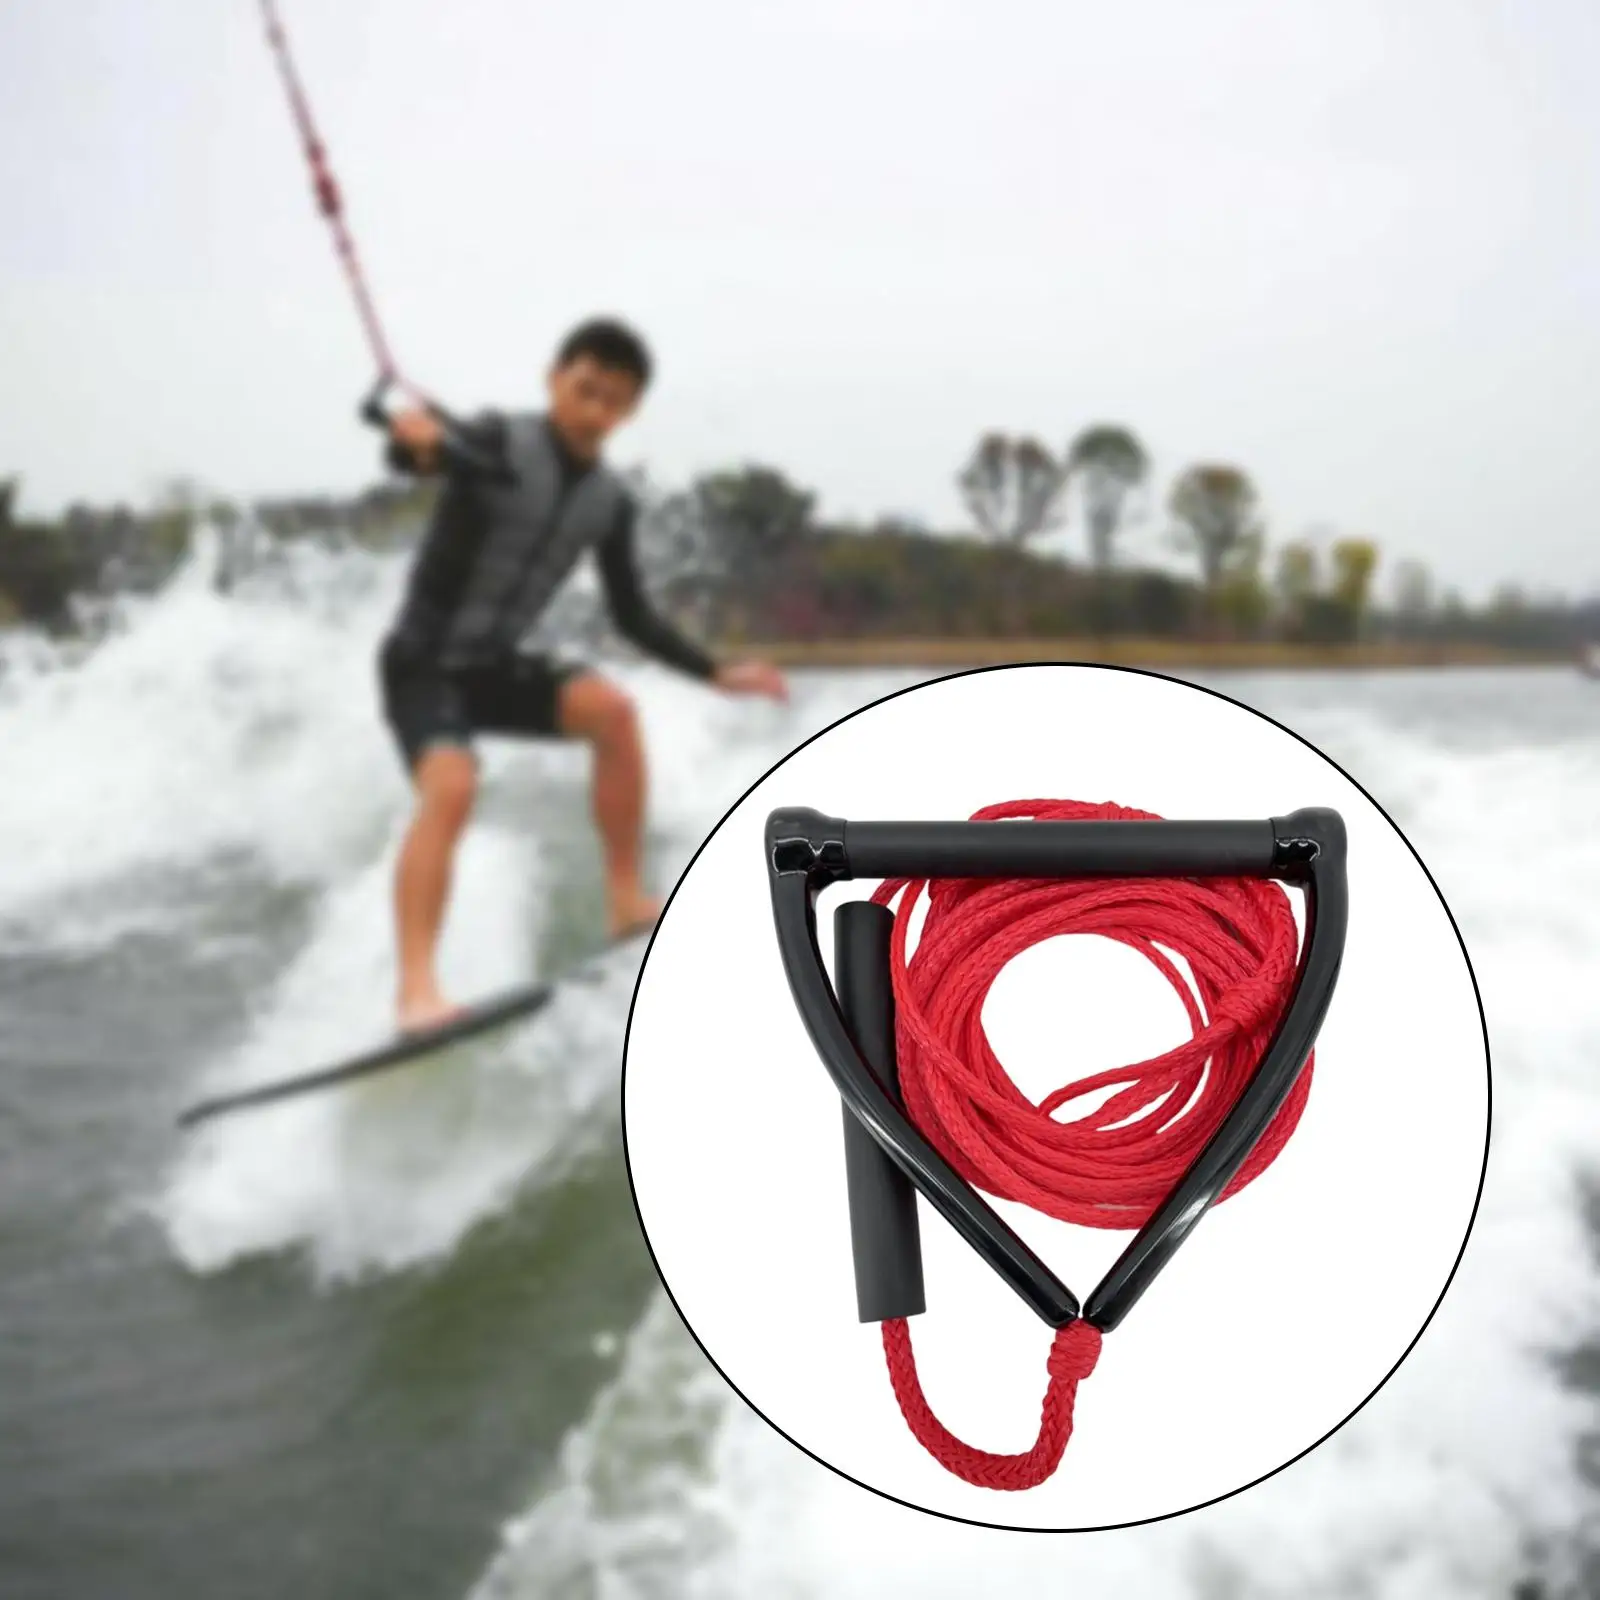 Water Ski Rope Water Sports Rope Portable Water Ski Tow Rope for Kneeboard